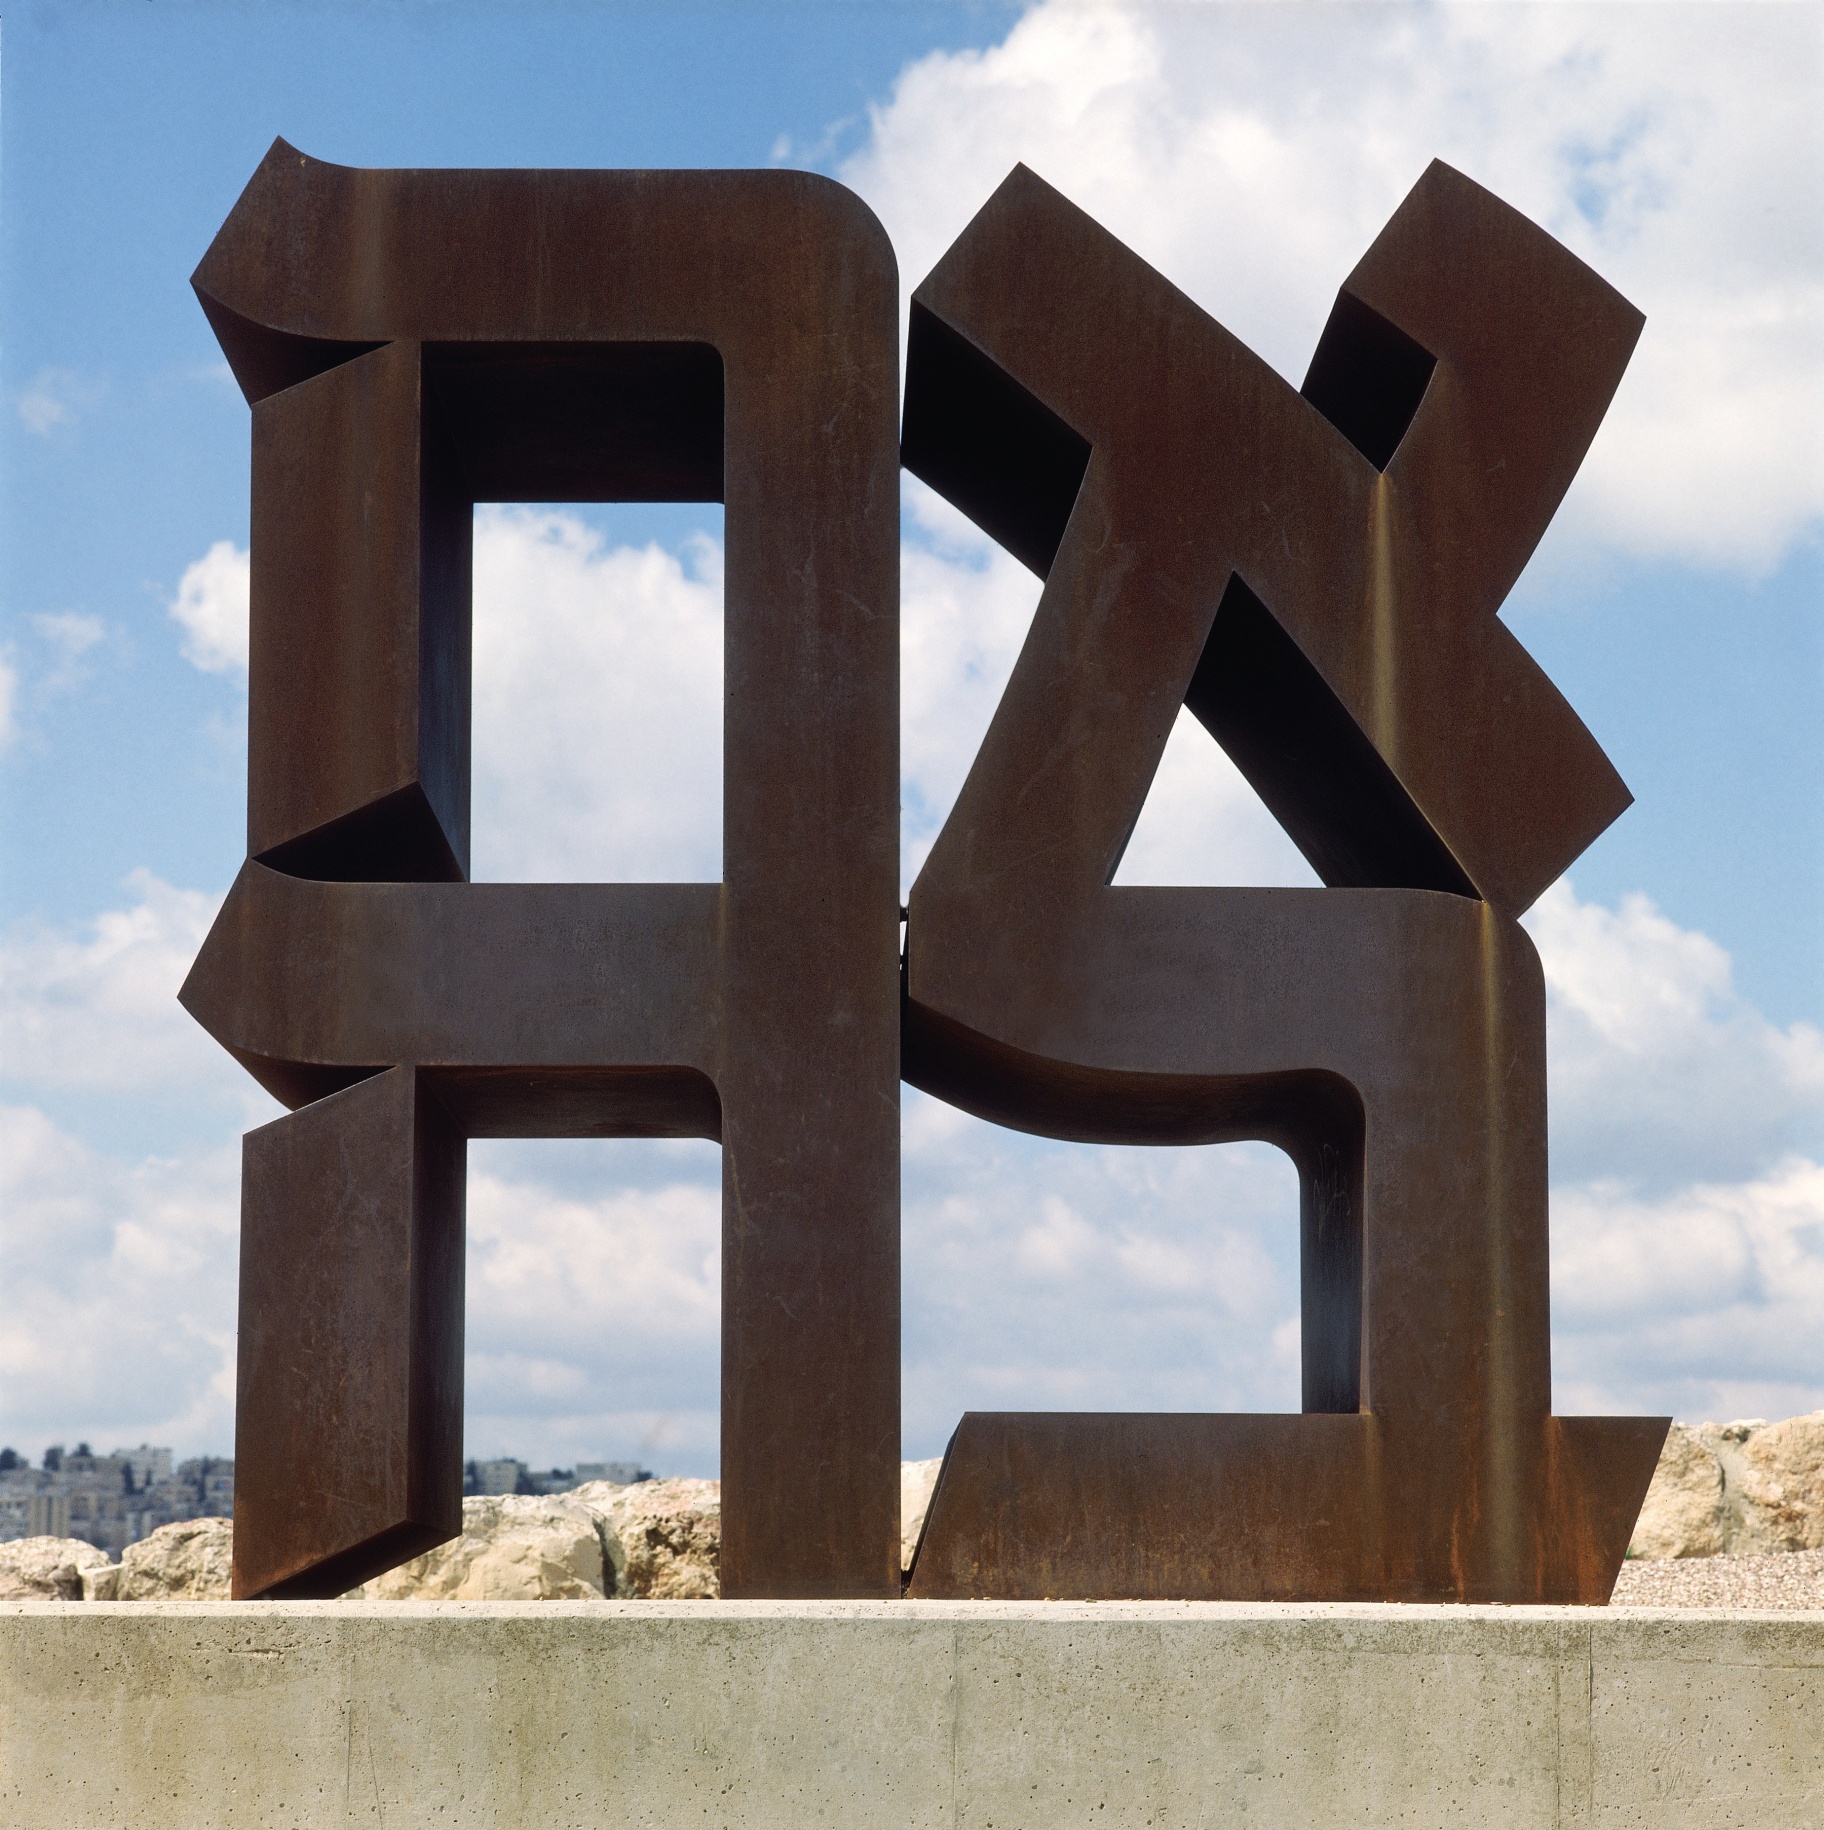 AHAVA, a 12 foot high Cor-Ten steel sculpture of the Hebrew word for love in the same quadripartite composition as his earlier LOVE sculpture.